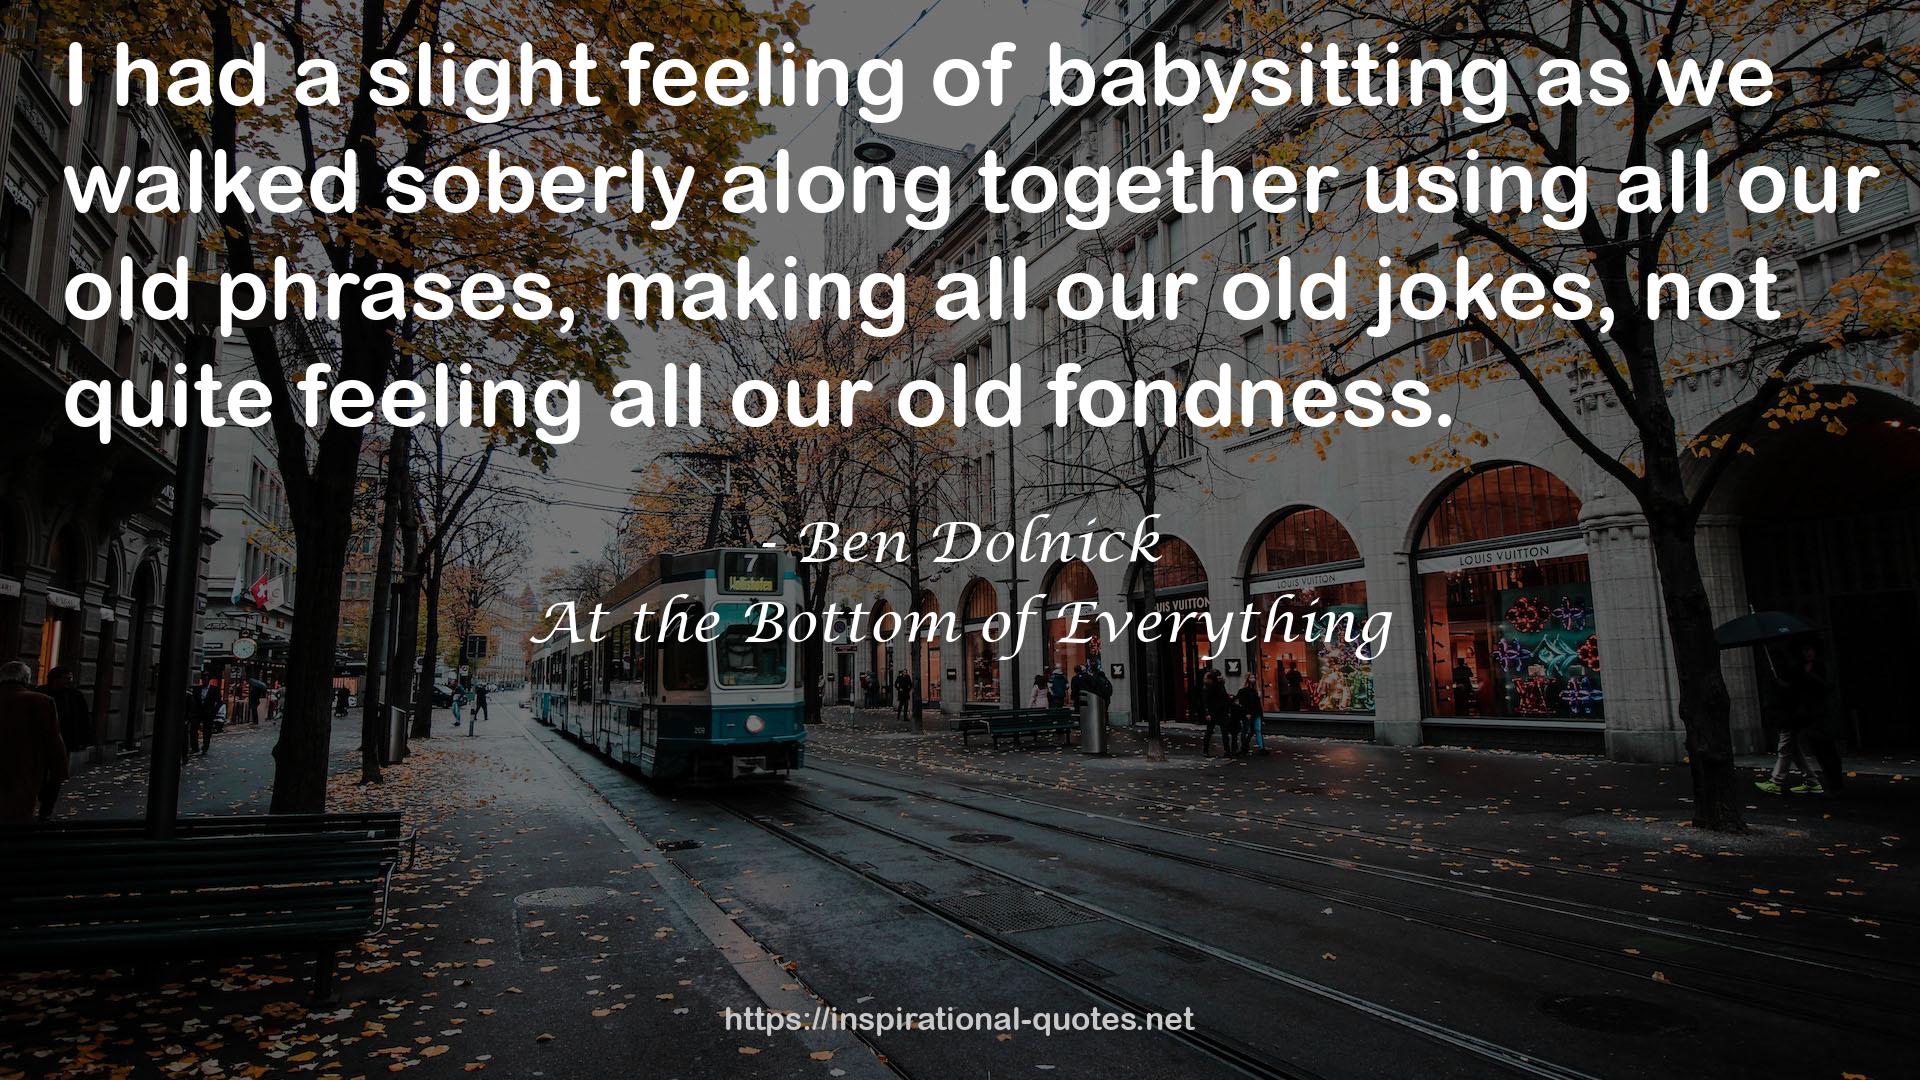 Ben Dolnick QUOTES